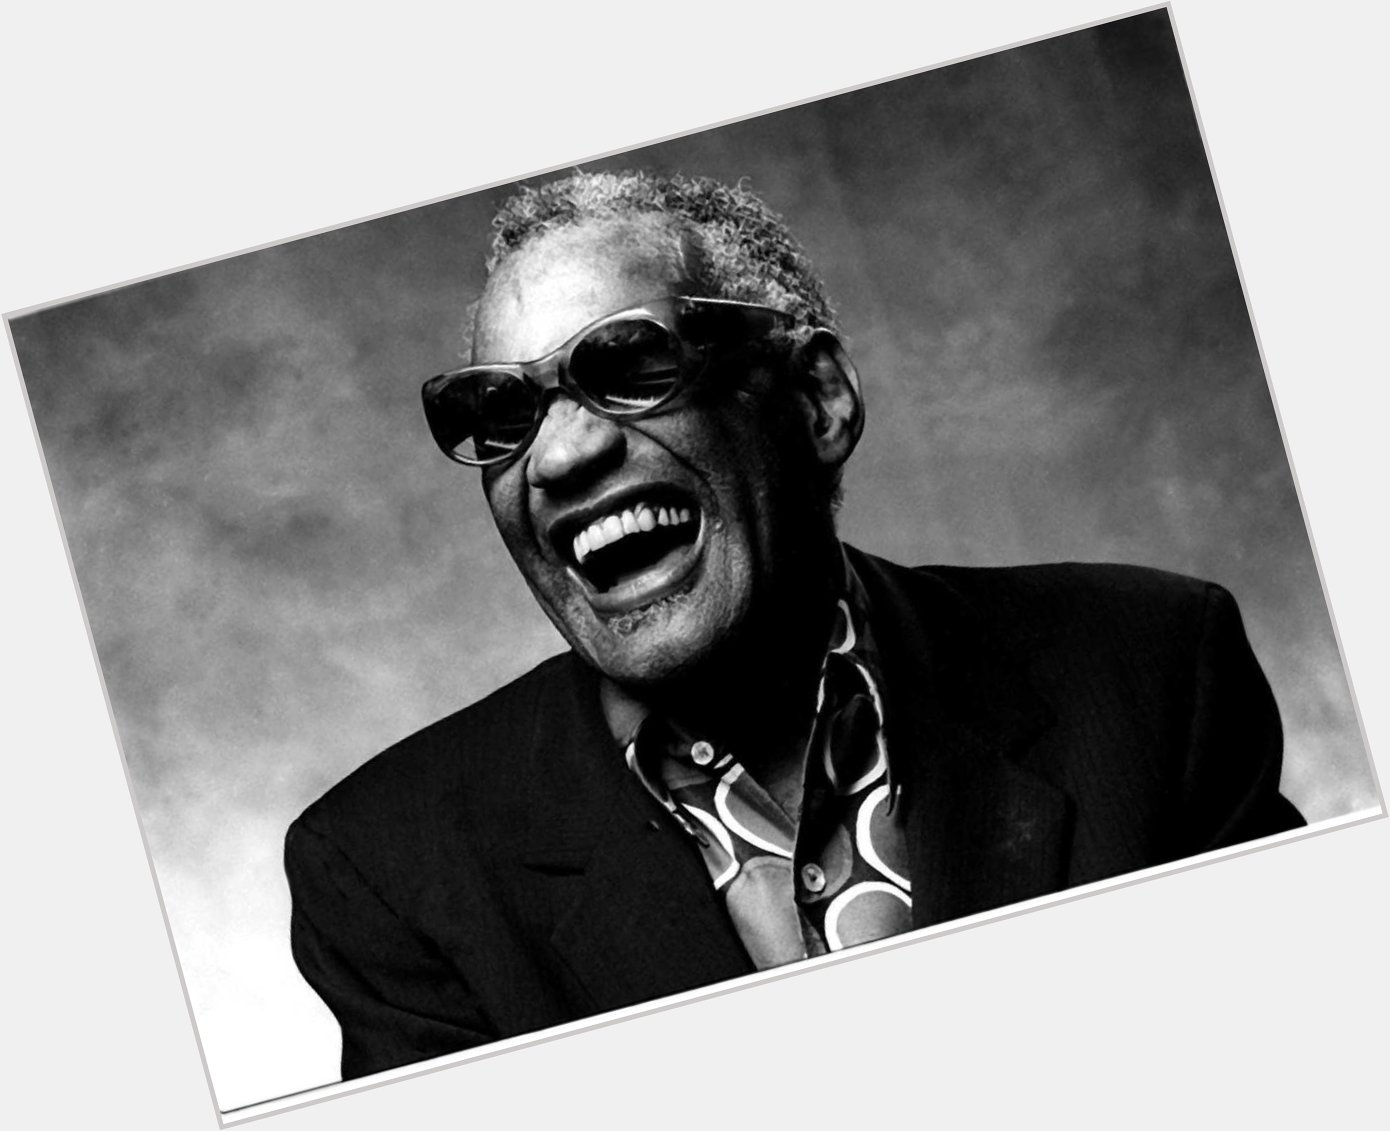 Happy birthday to the great, Ray Charles! He would have been 87 today. 